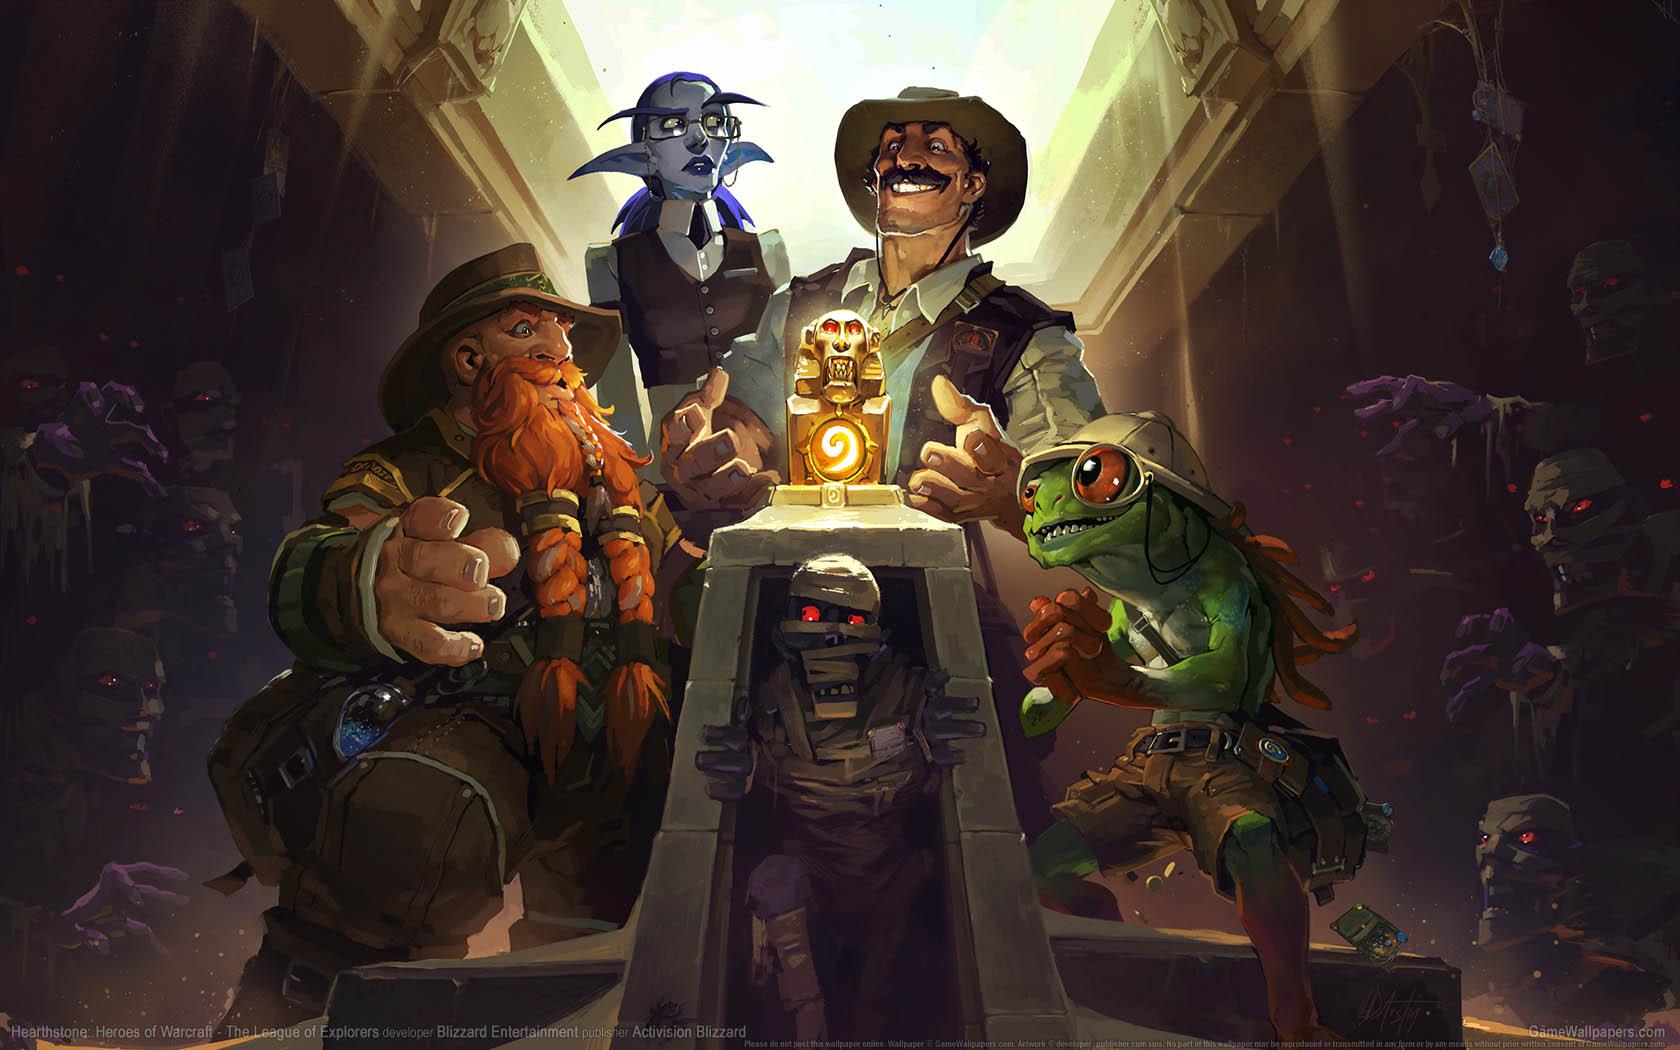 Hearthstone: Heroes of Warcraft - The League of Explorers fond d'cran 01 1680x1050